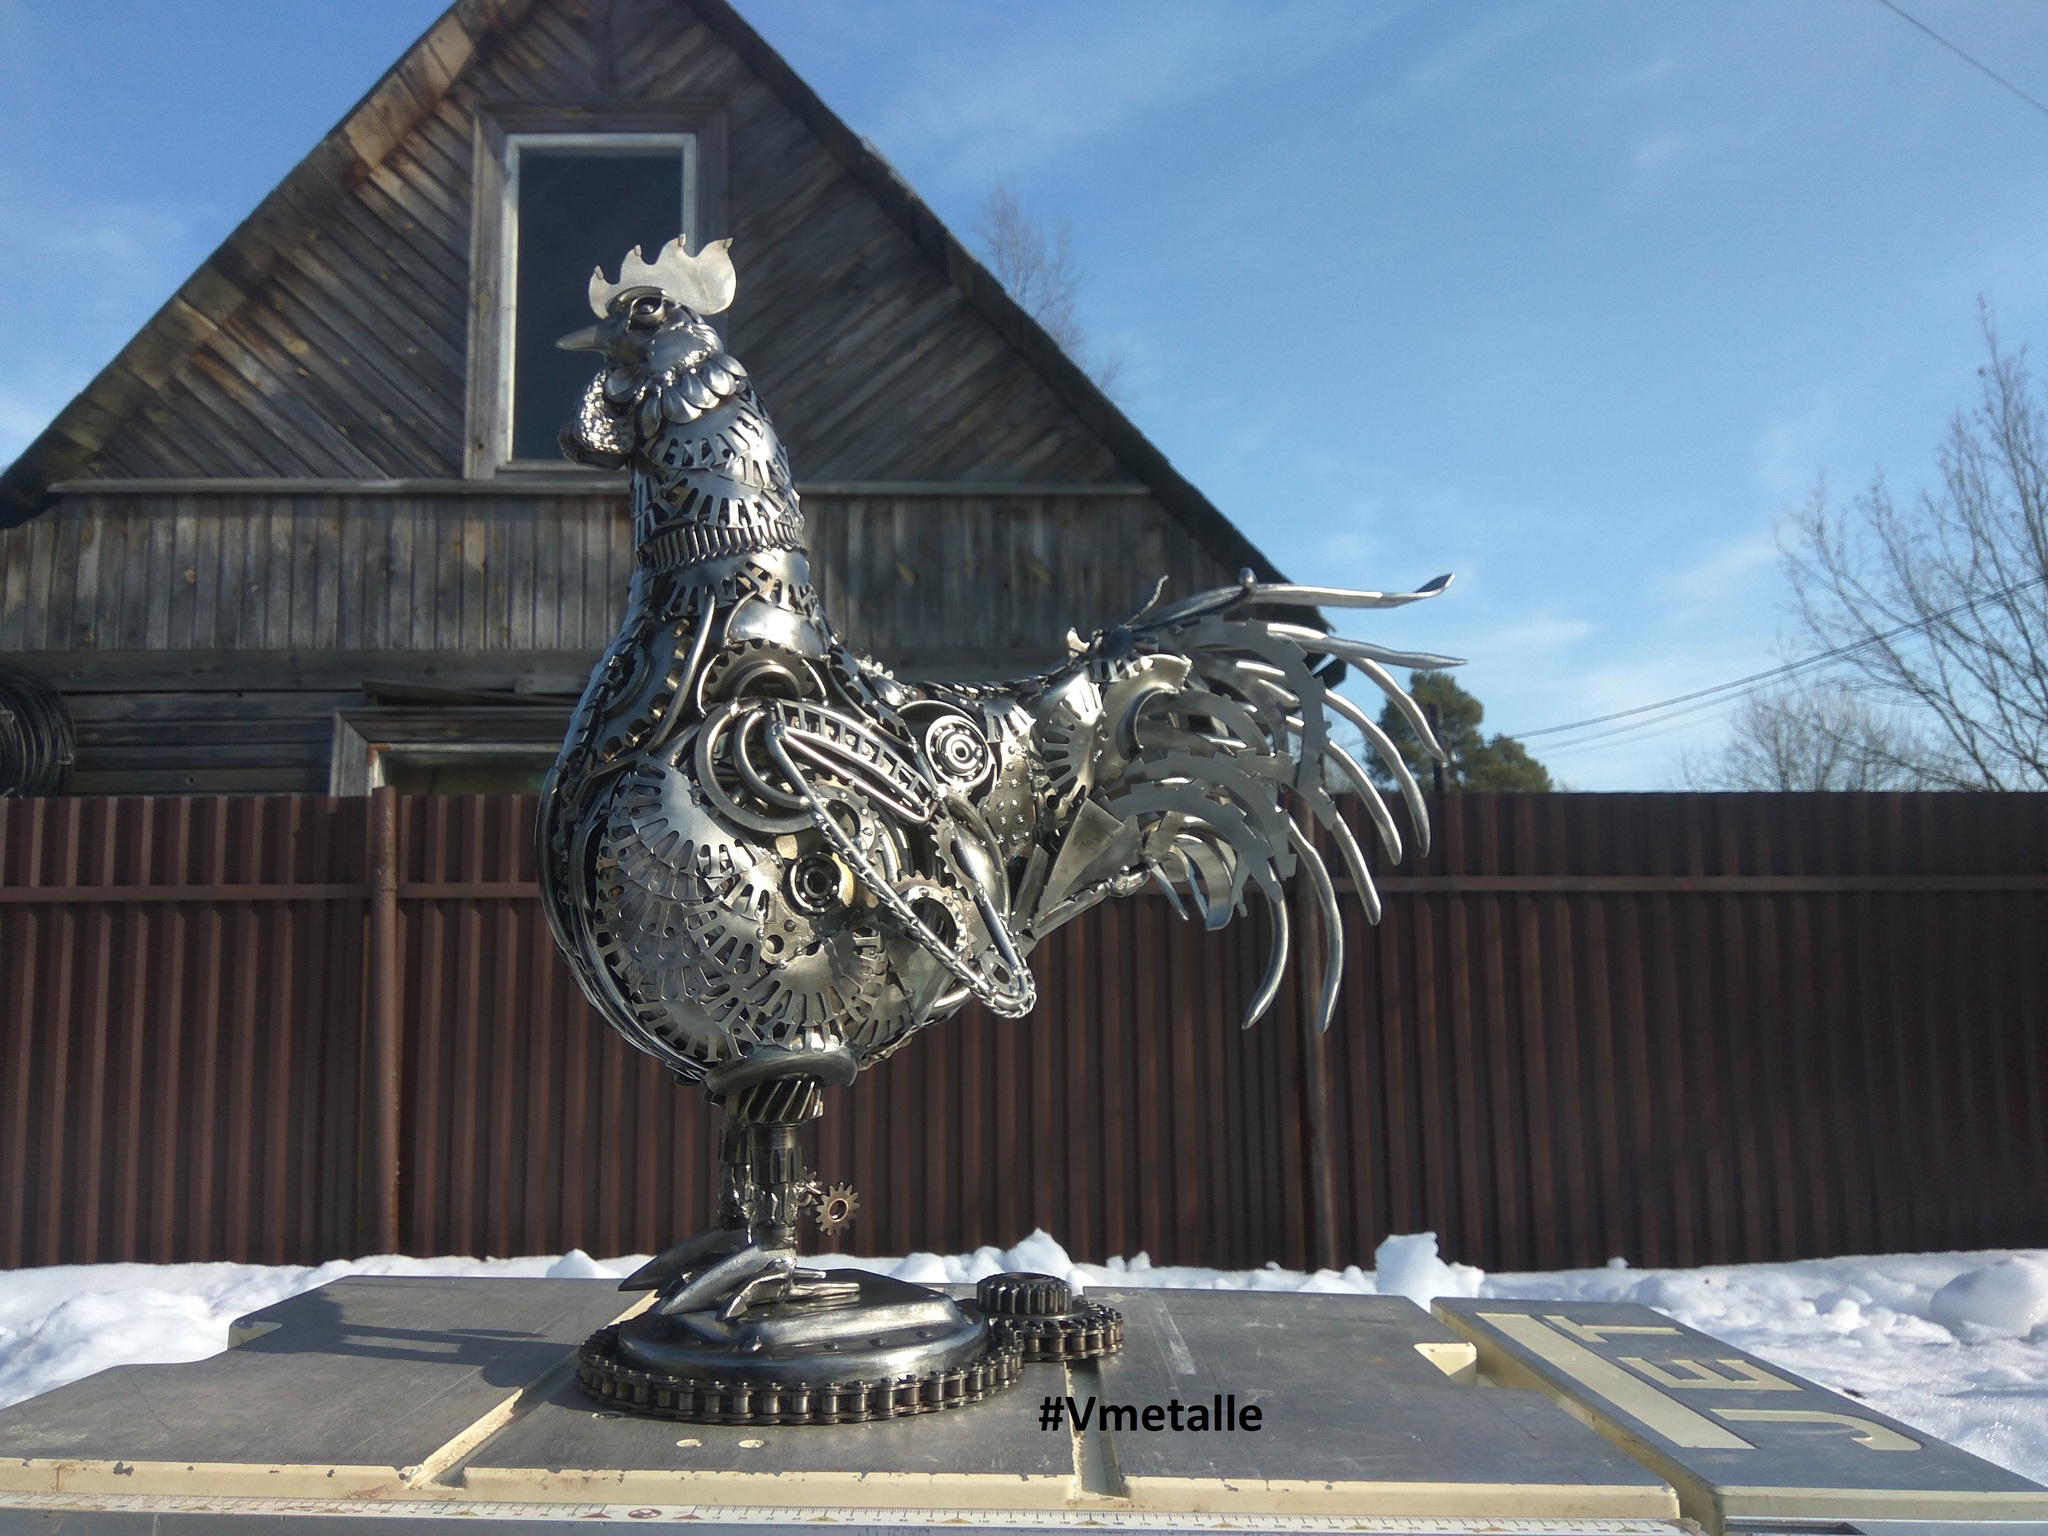 Rooster.Sculpture made of scrap metal and spare parts - , Longpost, Youtube, Video, Cock-a-doodle-doo, Fence, The sun, Village, Feathers, Wings, Birds, Mechanism, Gallery, Exhibition, Decor, Rooster, Creative, Creation, Resiklart, Welding, Needlework with process